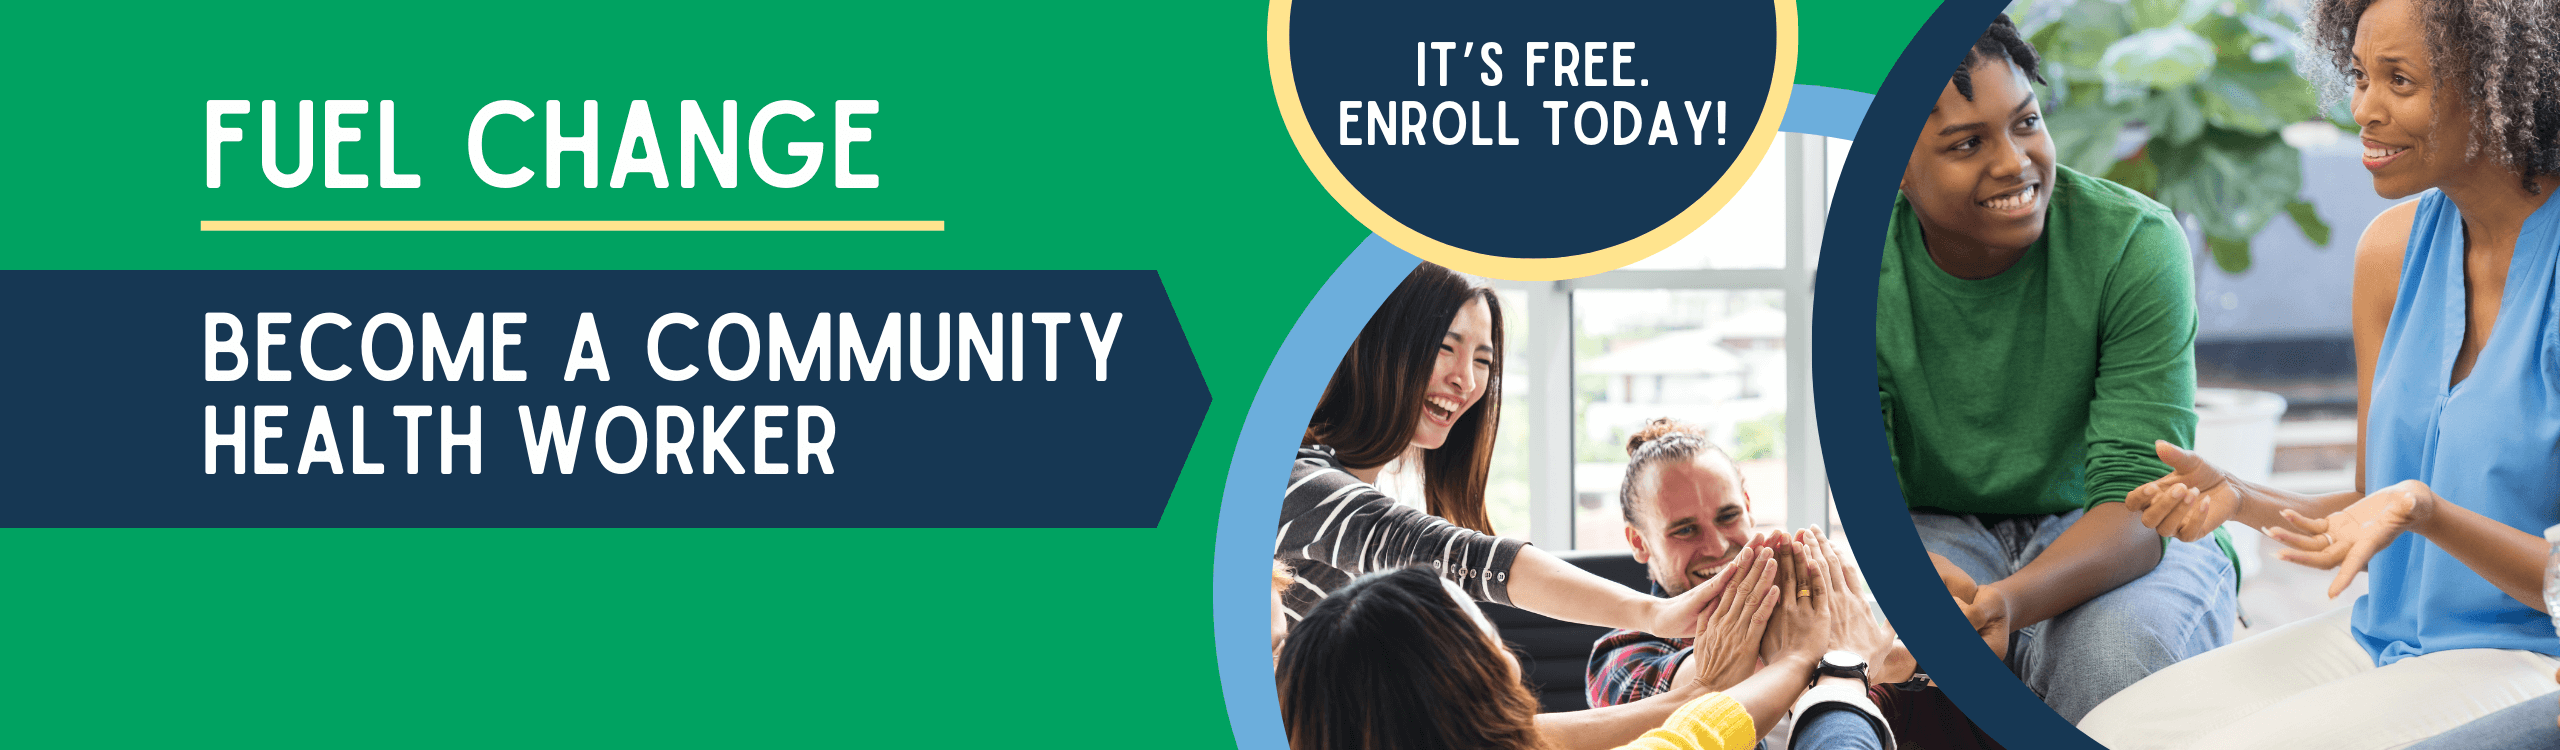 Fuel change. Become a community health worker. It's free, enroll today!